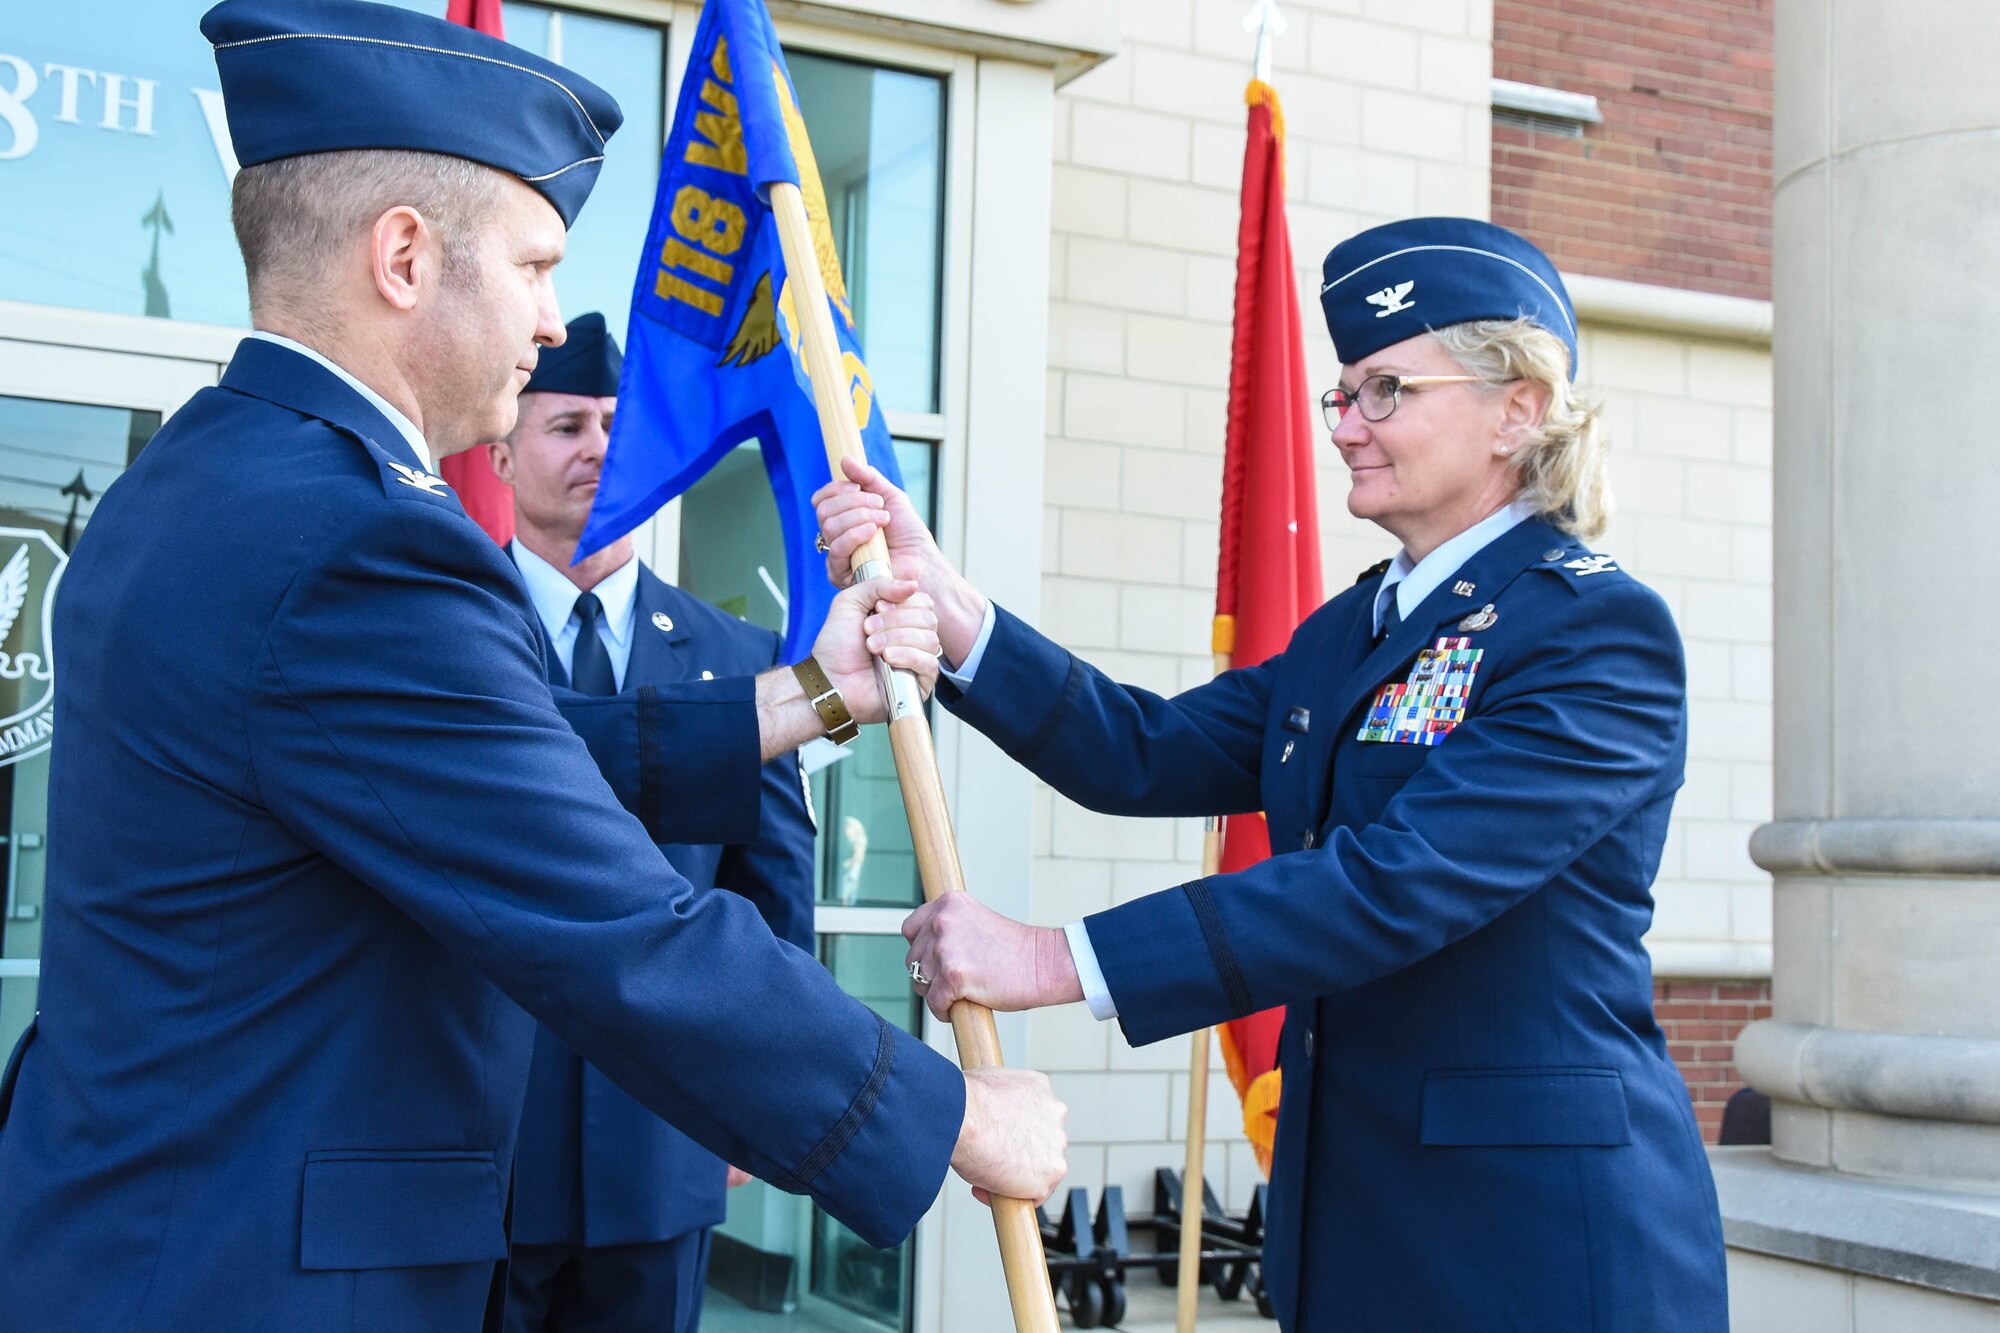 Col. Lawana Nelson receives the guideon at the change of command ceremony for the 118th Mission Support Group at the 118th Wing in Nashville, Tennessee June 2, 2018.